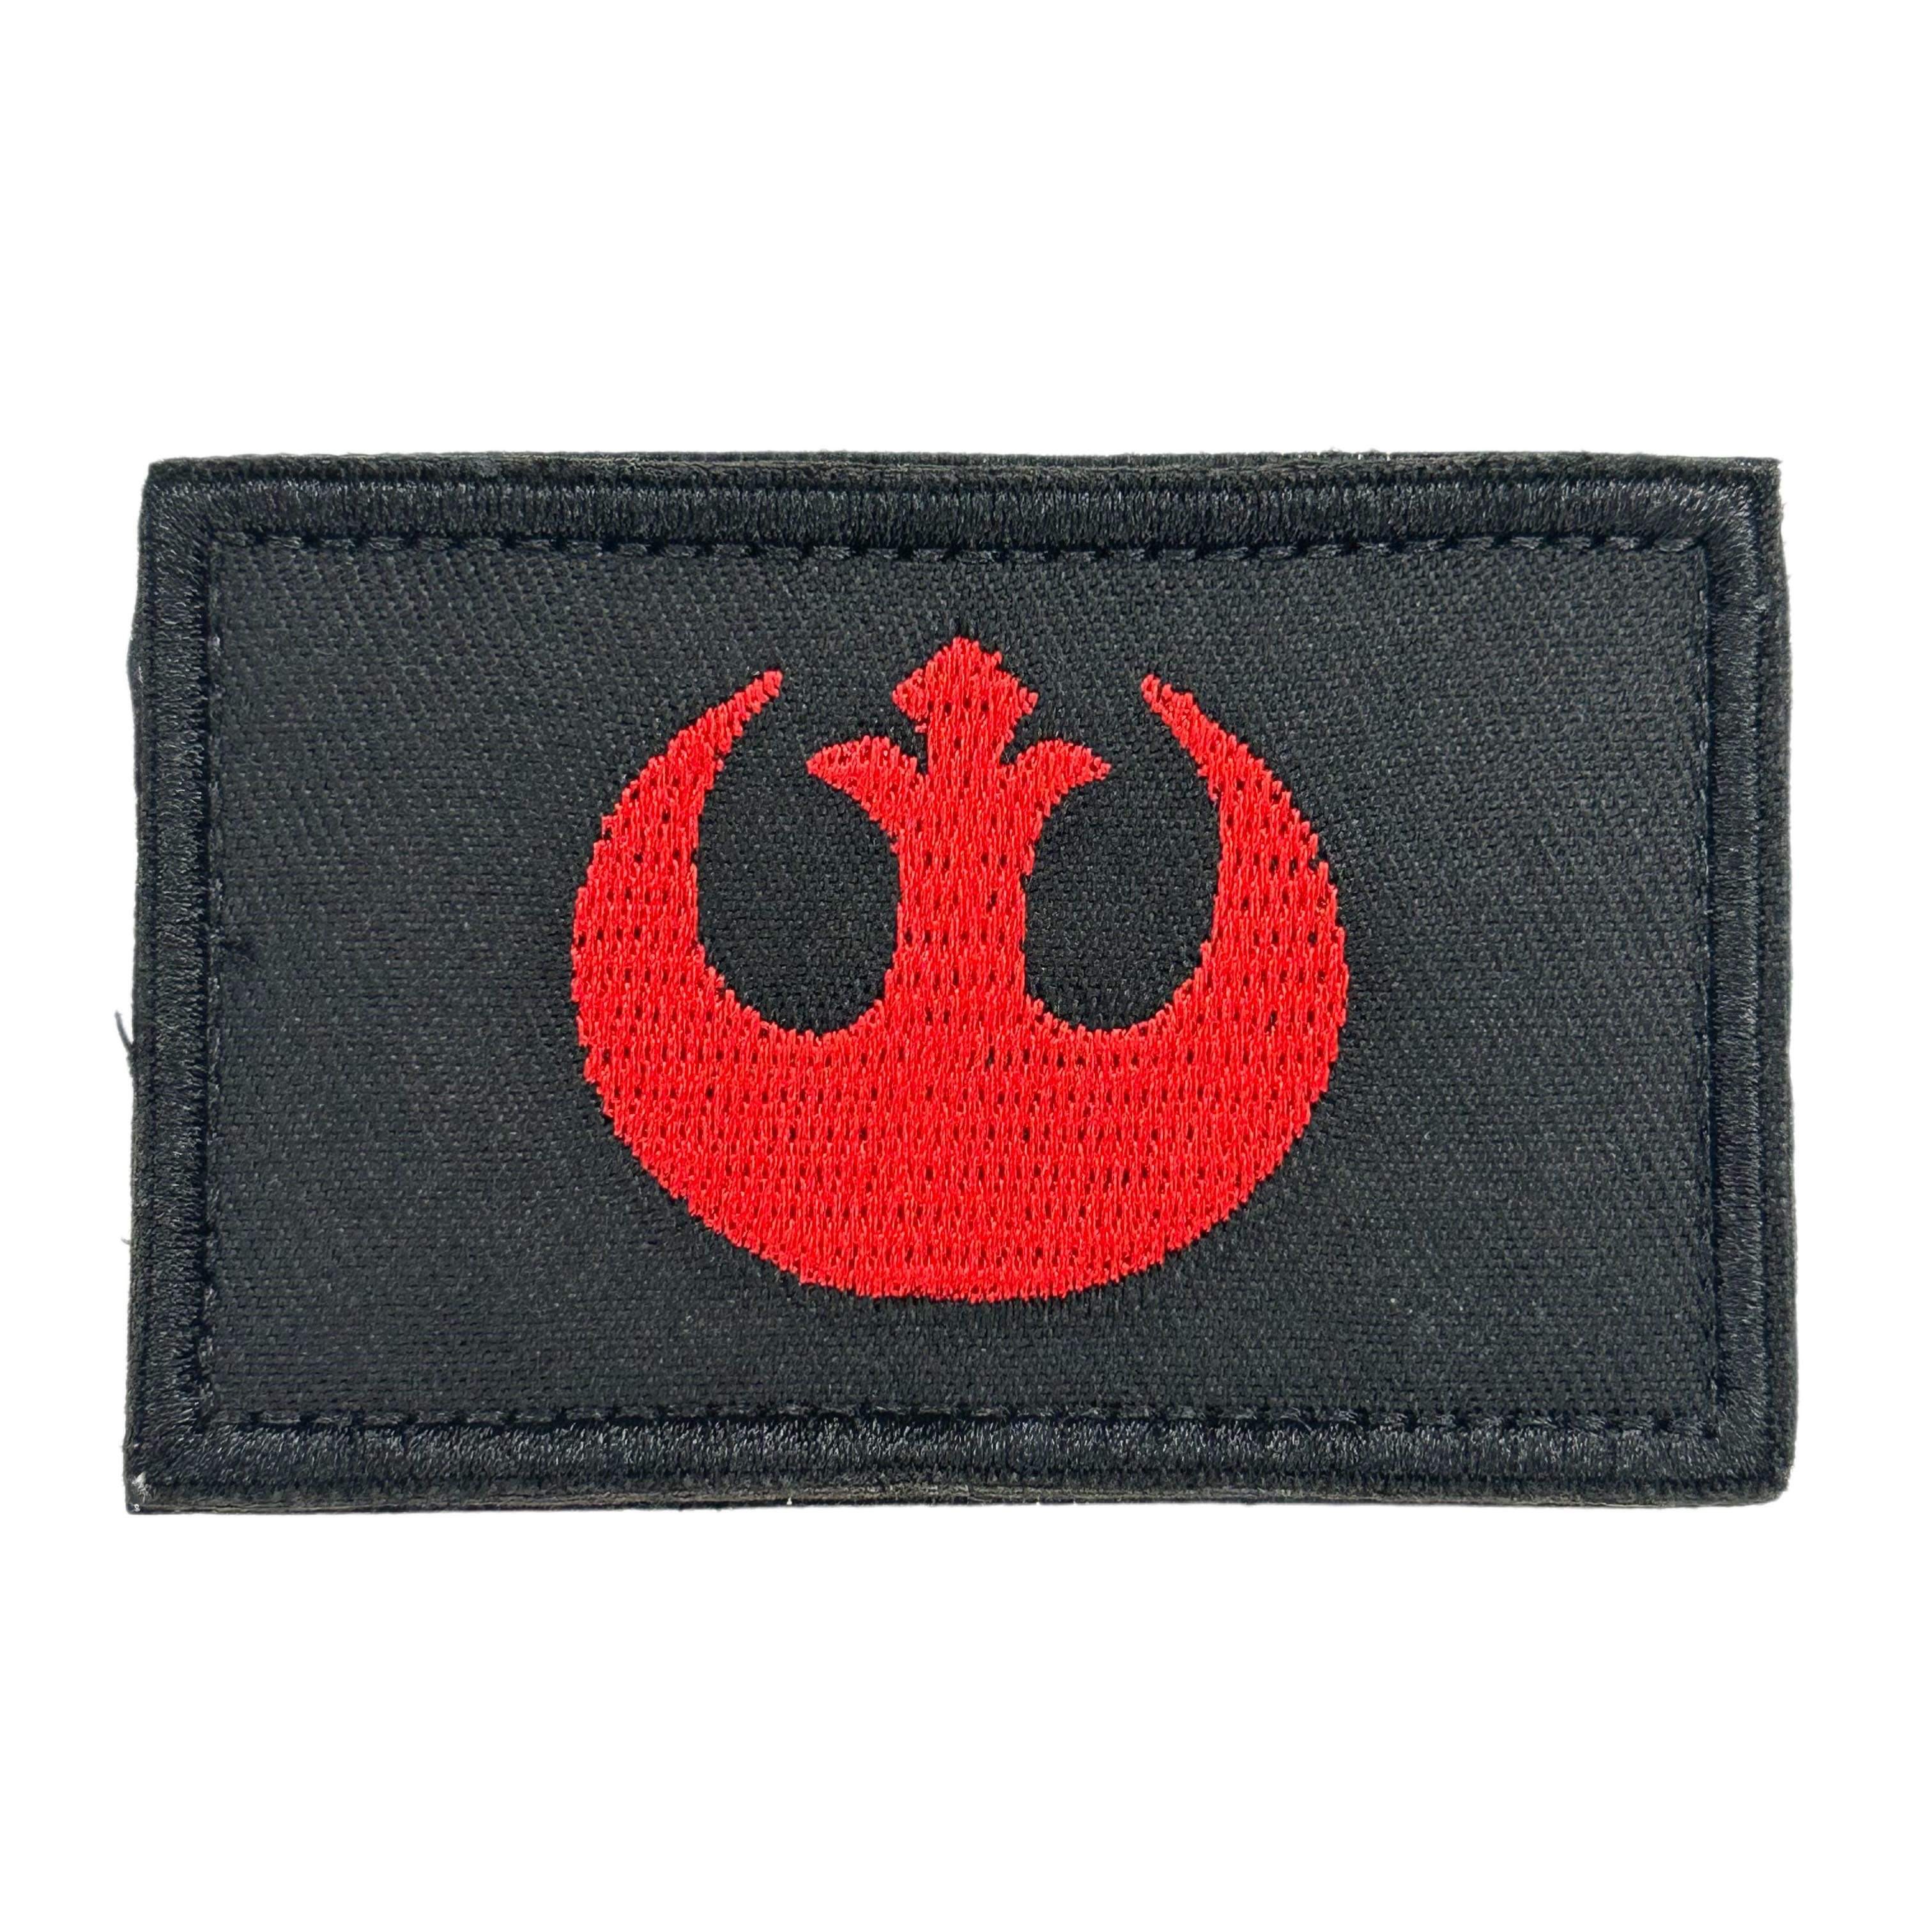 Embroidery Patch - Rebel Alliance